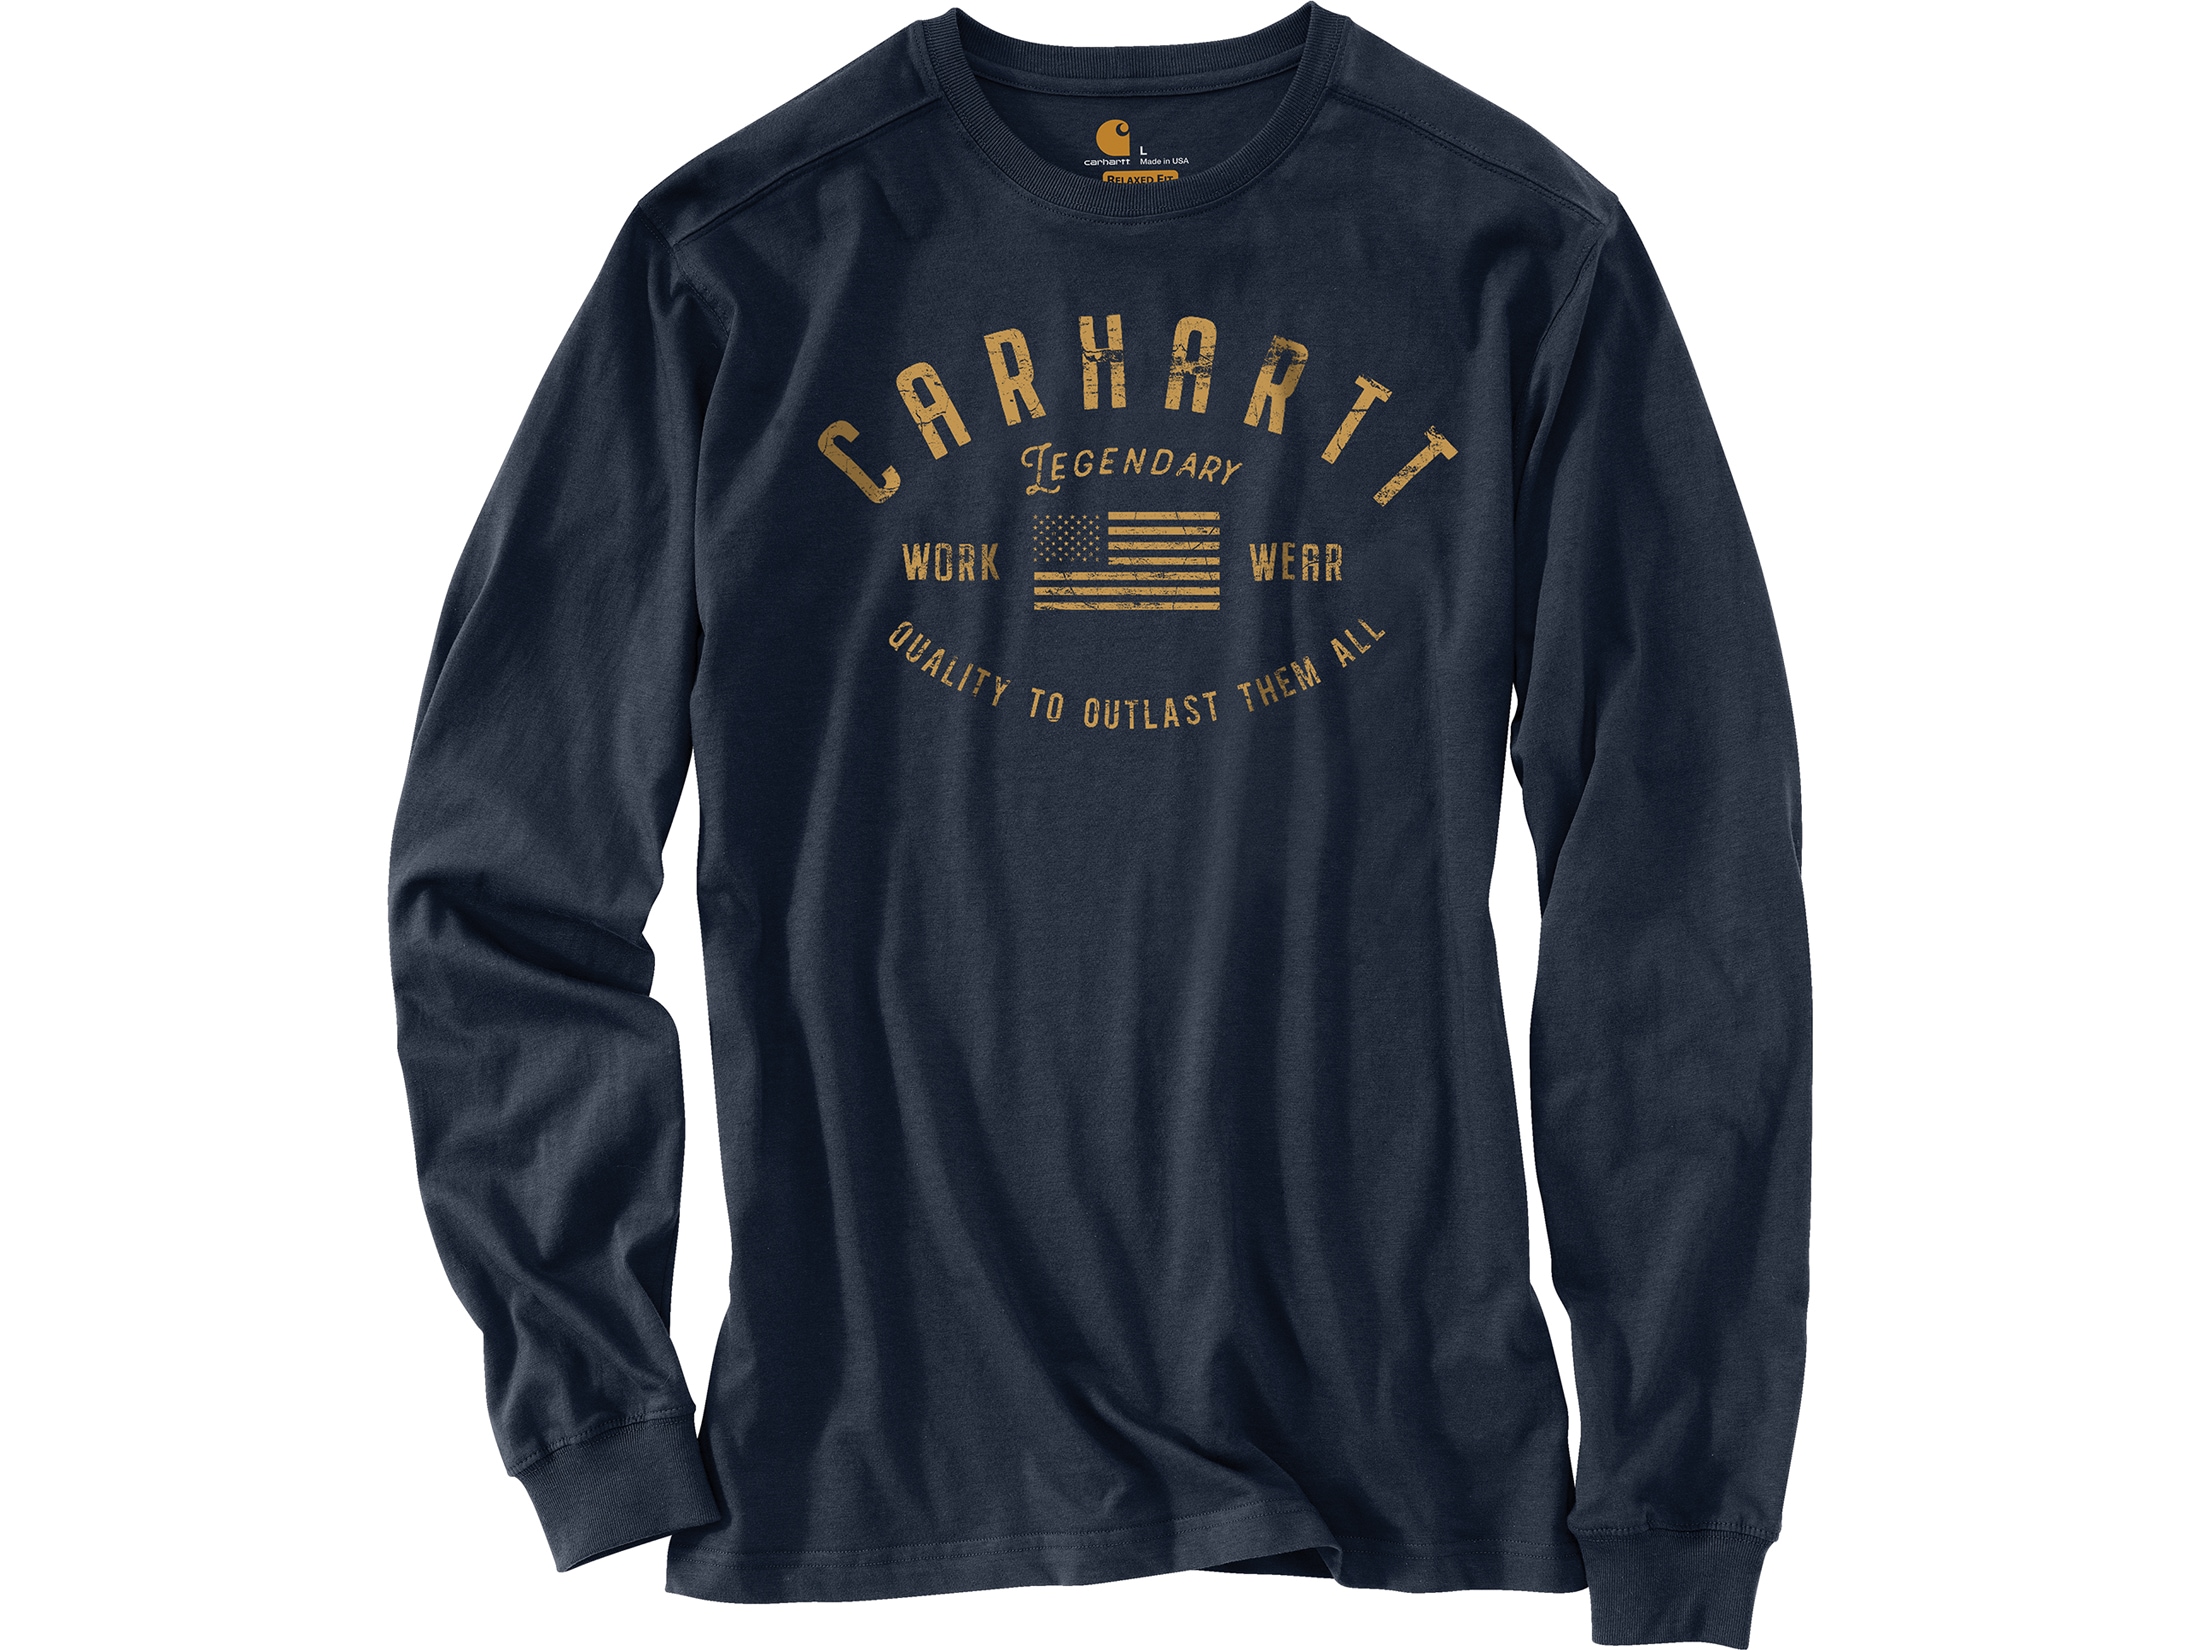 Carhartt Men's Relaxed Fit Midweight Legendary Graphic Long Sleeve